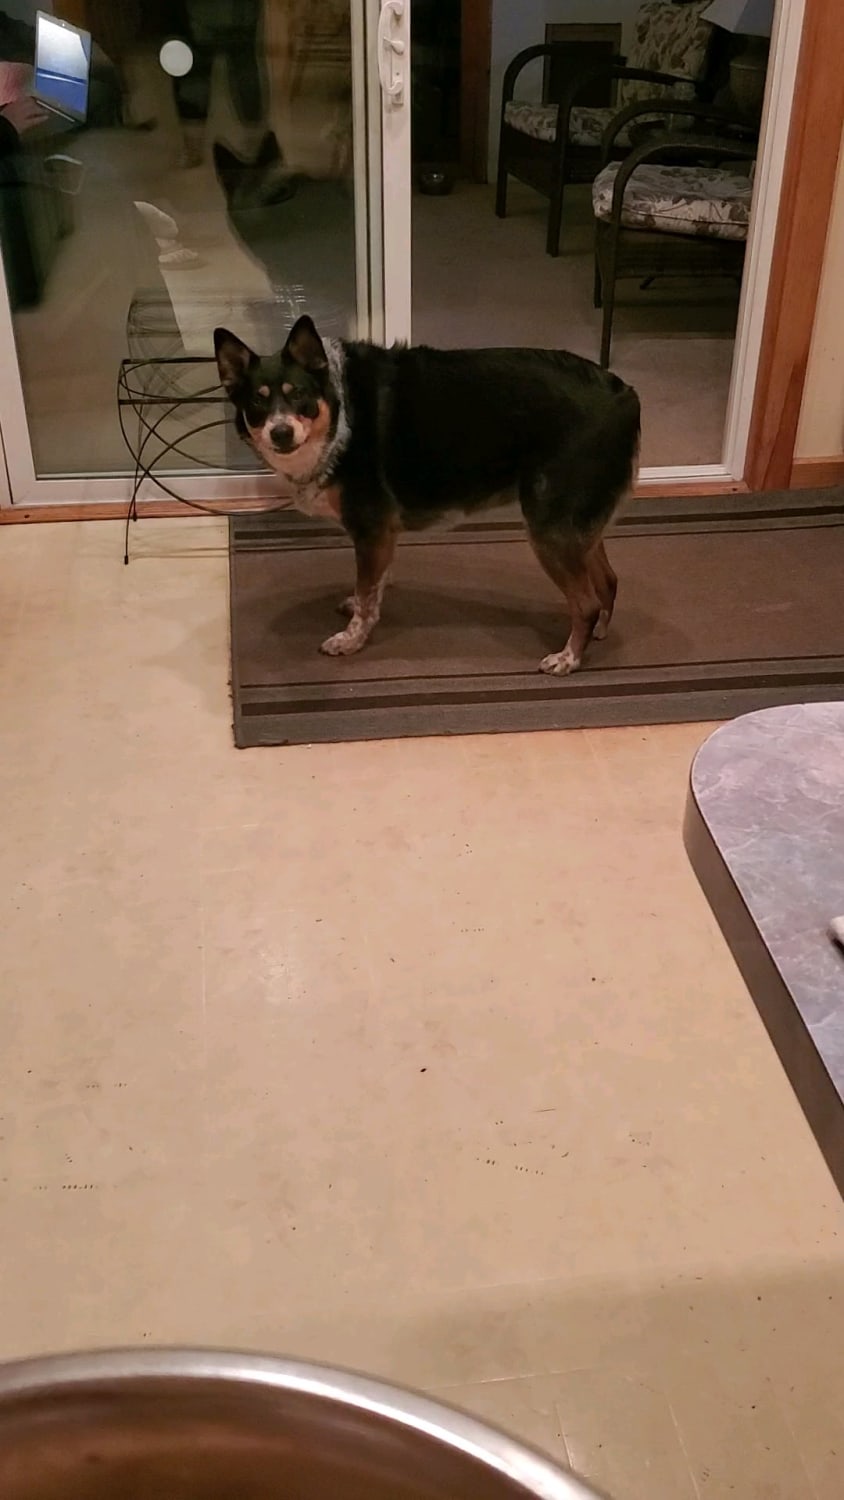 Sideways tippy taps! She does this every night for dinner